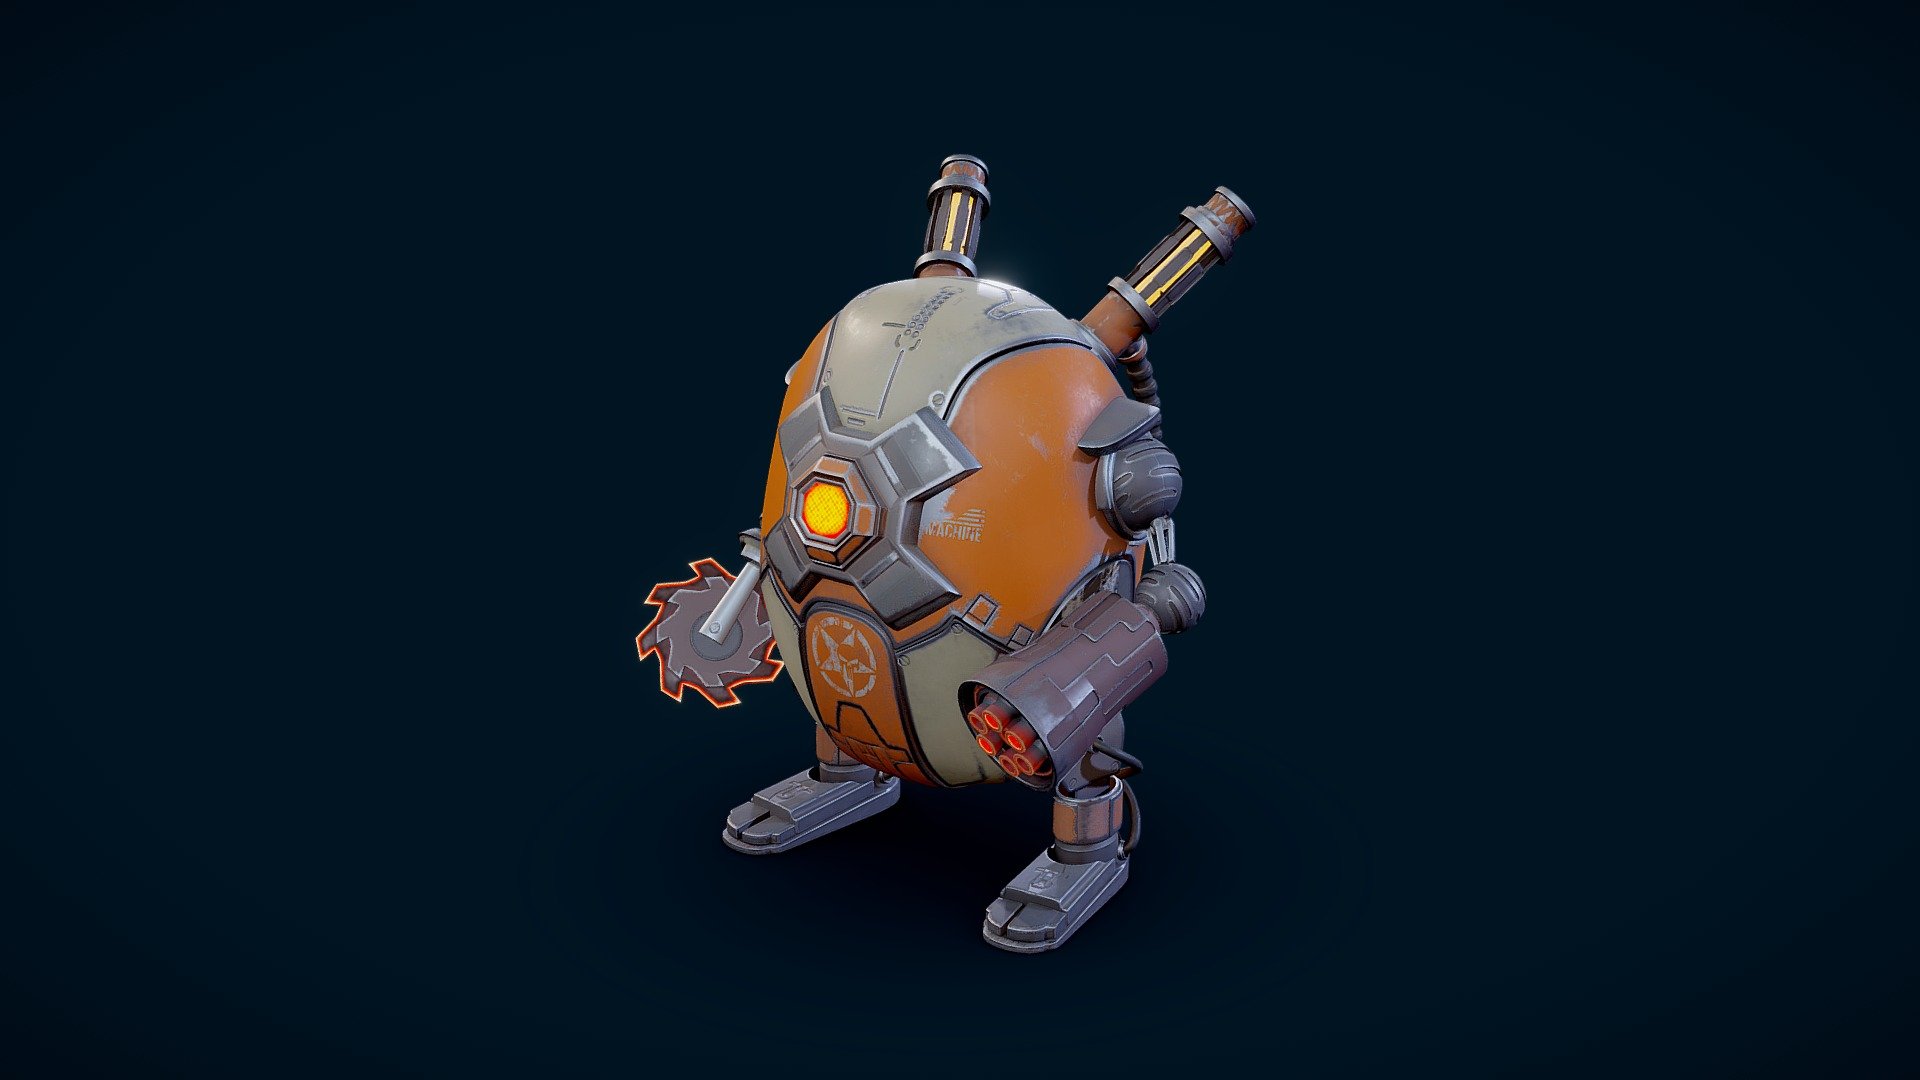 Stylized Mech character created with Maya, Zbrush and RizonmUV. Substance painter is used to create high-quality pbr texture.

You may also like: https://sketchfab.com/3d-models/tank-t72-e415f62fa428411f9ab5d851dd40183a

To learn more about products &amp; services go to:
Website: http://www.dreamerzlab.com
Like, Subscribe &amp; Follow:
Facebook: https://www.facebook.com/dreamerzlab
YouTube: https://www.youtube.com/channel/UCBxy&hellip;
Linkedin: https://www.linkedin.com/company/drea&hellip;
Twitter: https://twitter.com/dreamerz_lab
Instagram: https://www.instagram.com/dreamerzlabltd
Email: info@dreamerzlab.com 
Call: +8801675110479 - Stylized Mech - 3D model by Dreamerz Lab (@dreamerzlab) 3d model